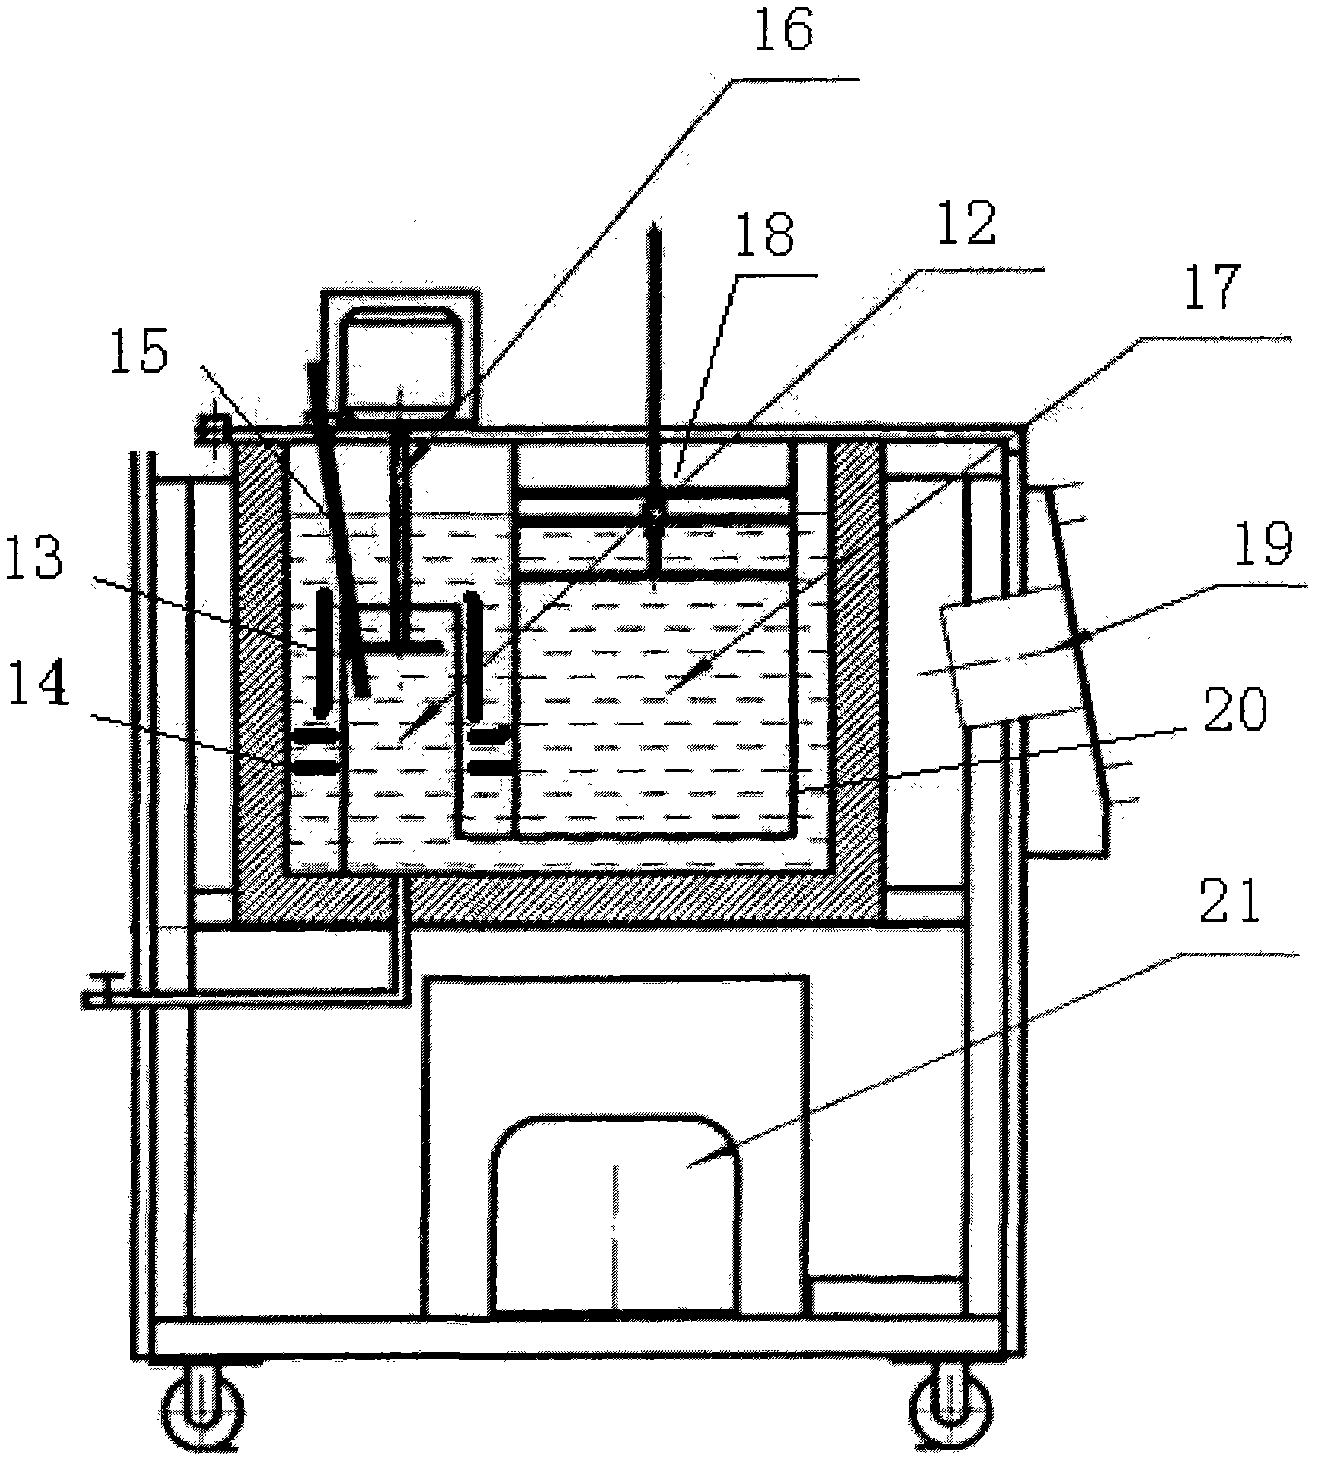 Thermostatic bath for verifying temperature sensor paired with calorimeter